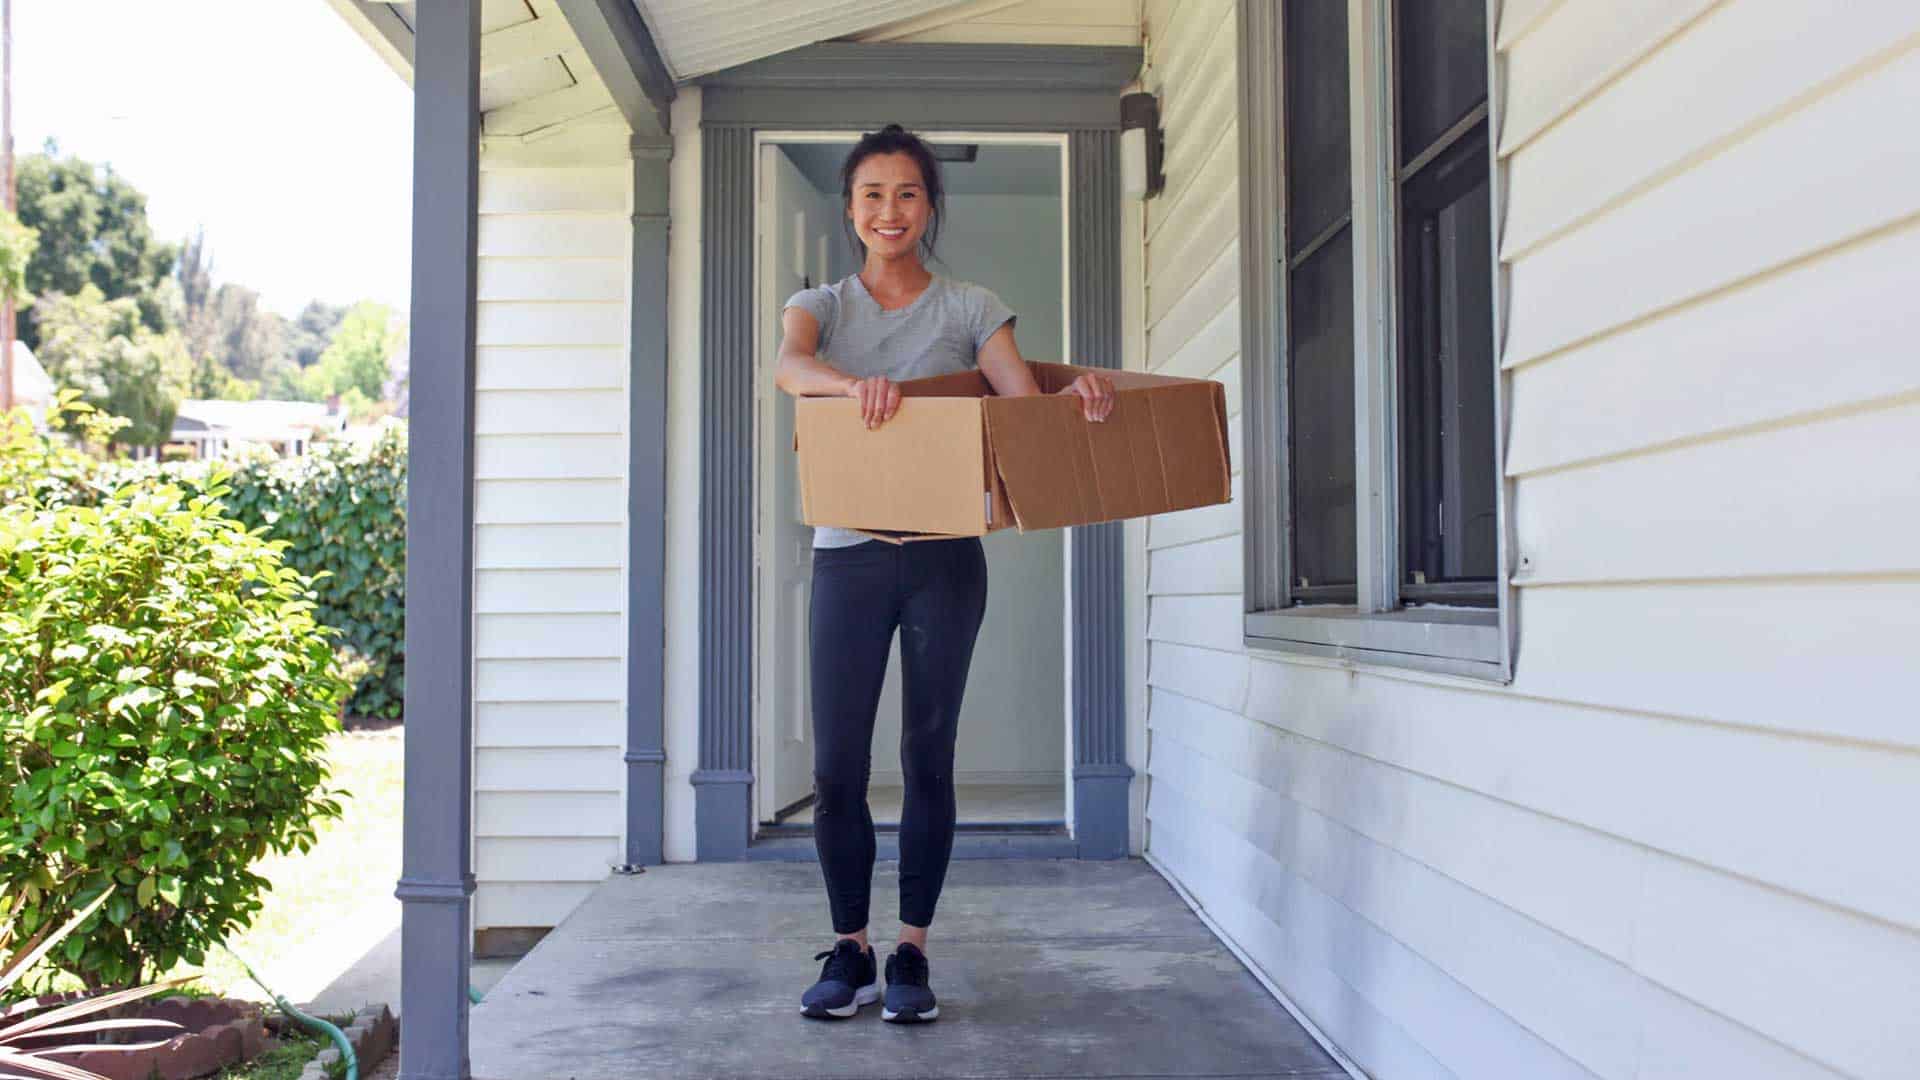 Photo of a woman with a moving box